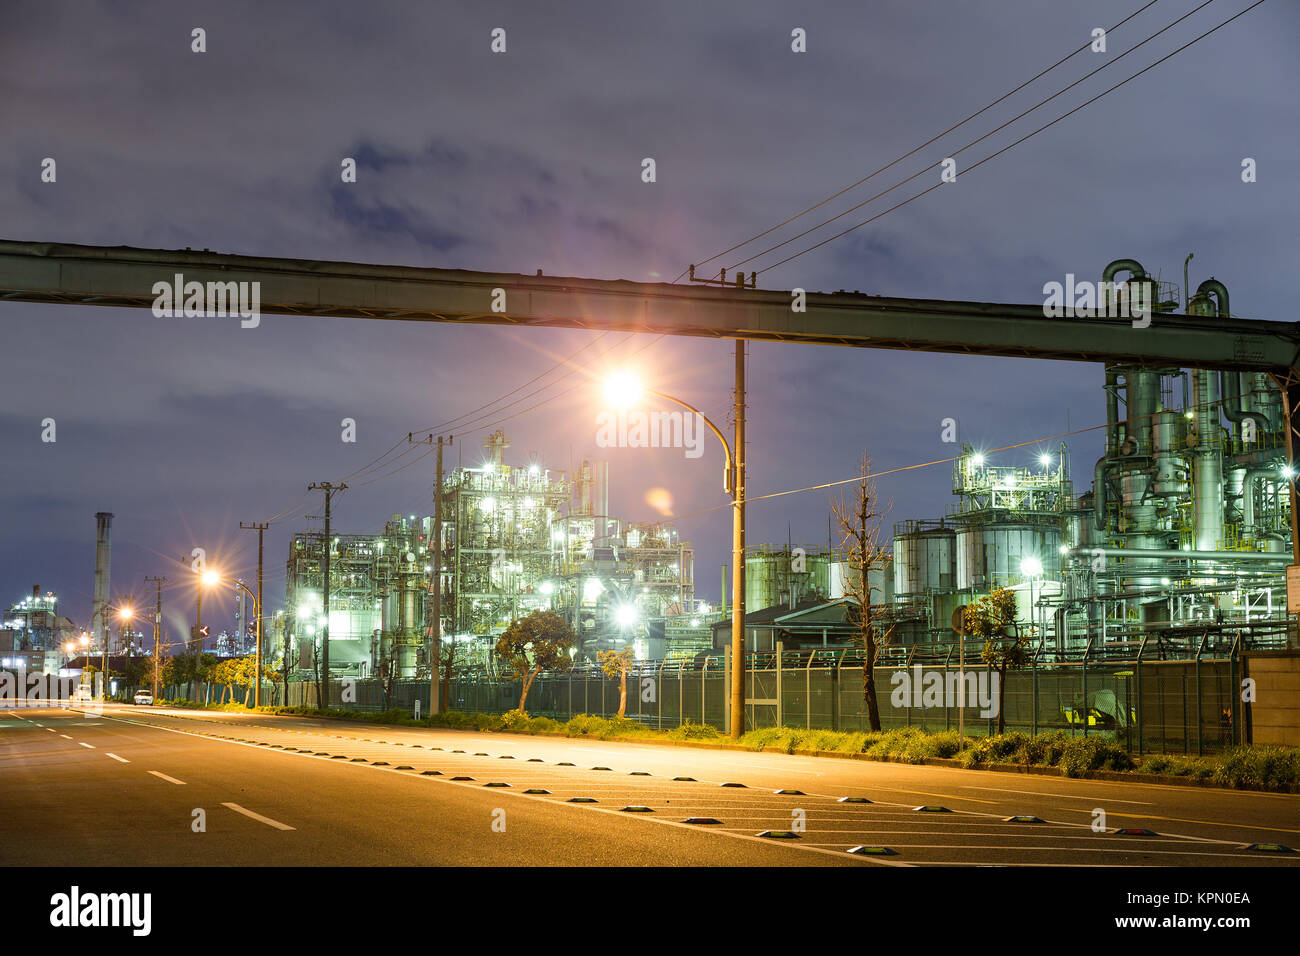 Industrial building at night Stock Photo